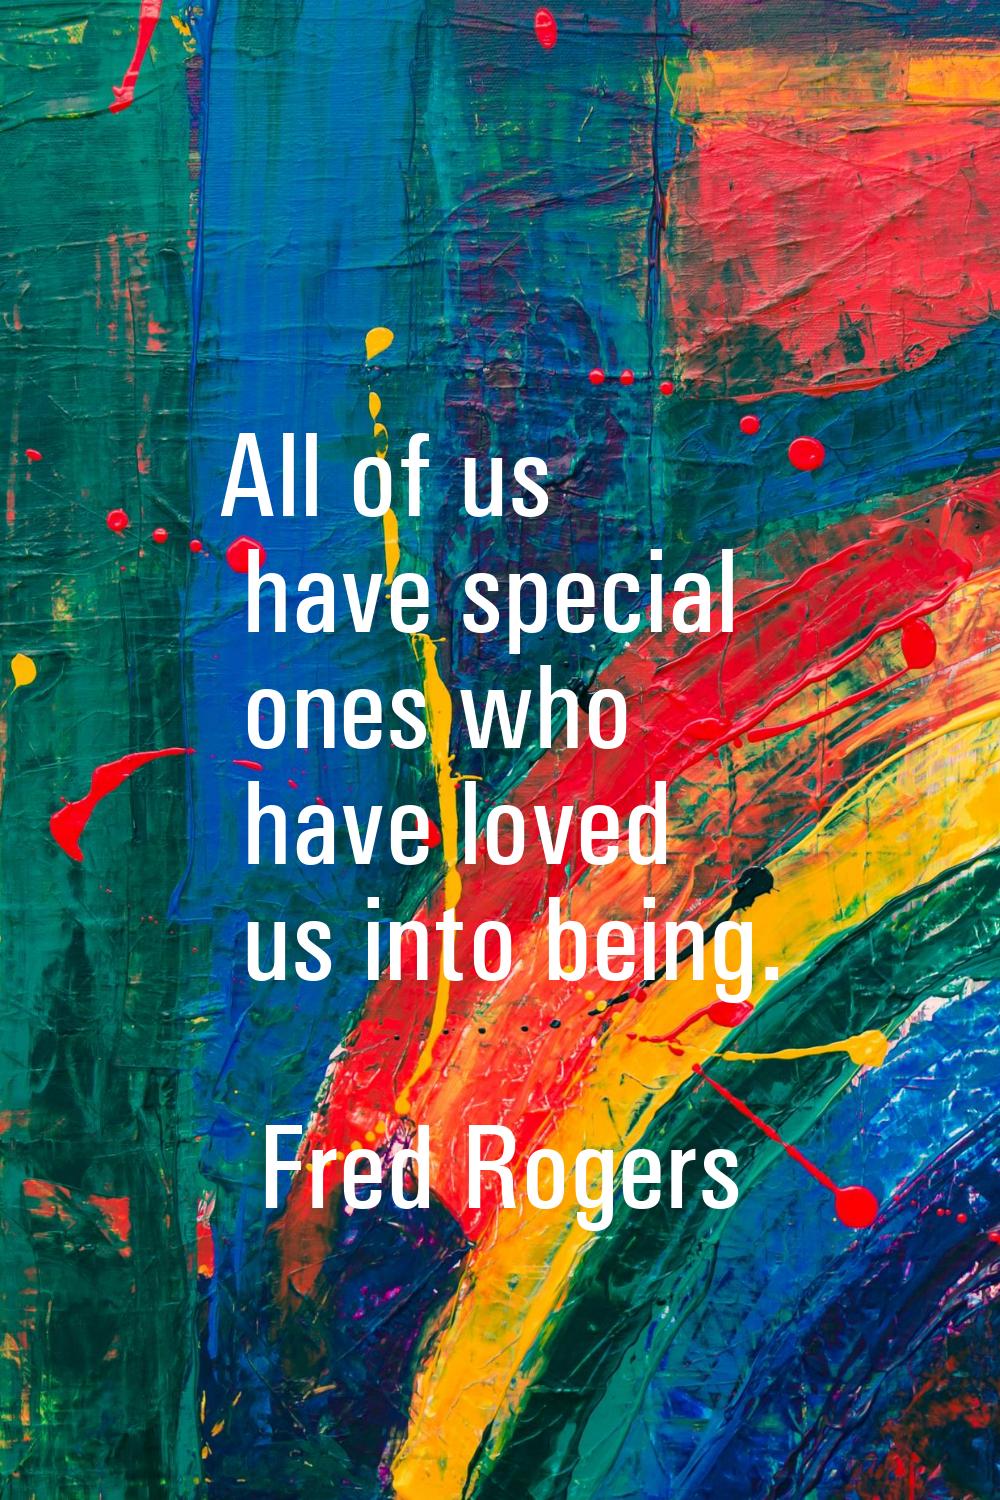 All of us have special ones who have loved us into being.